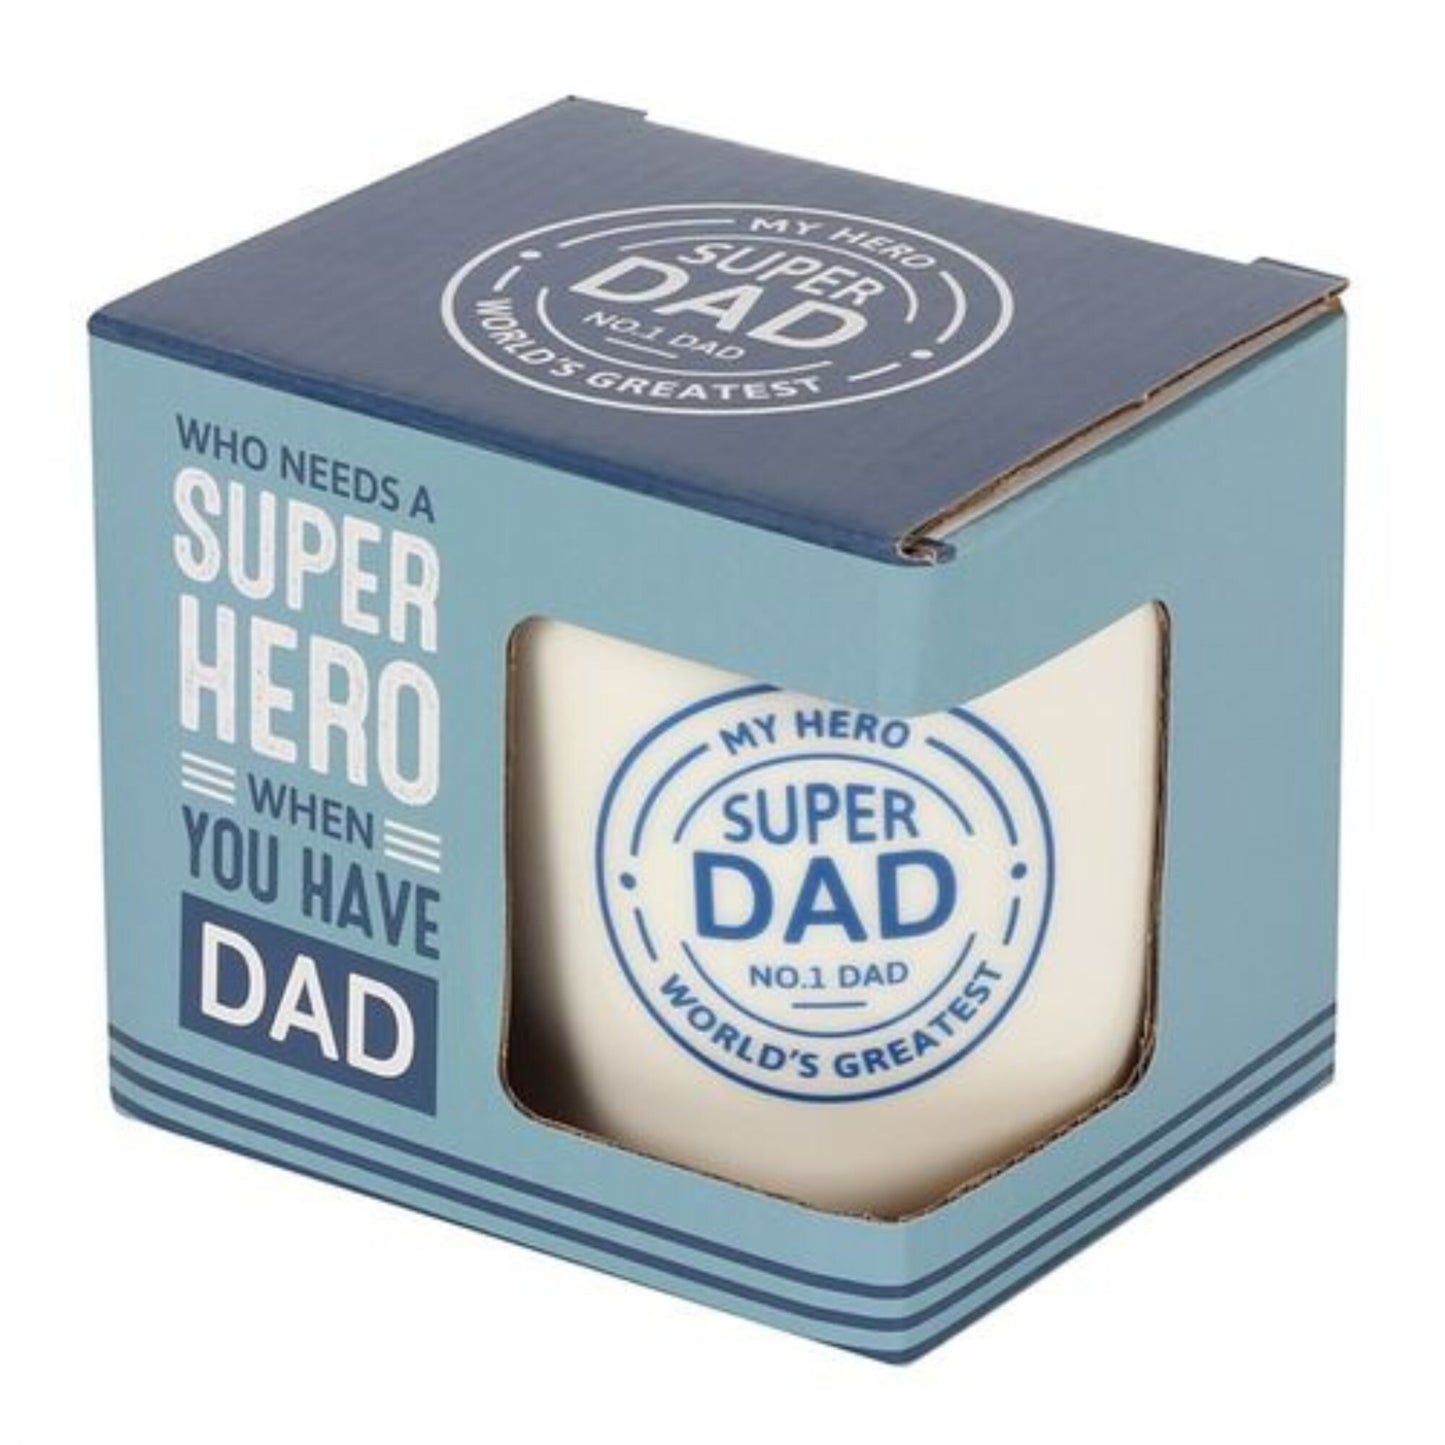 Super Dad Daddy Mug, Fathers Day Gift, Present For Dad, Birthday Gift For New Dad, First Time Daddy Fun Cup